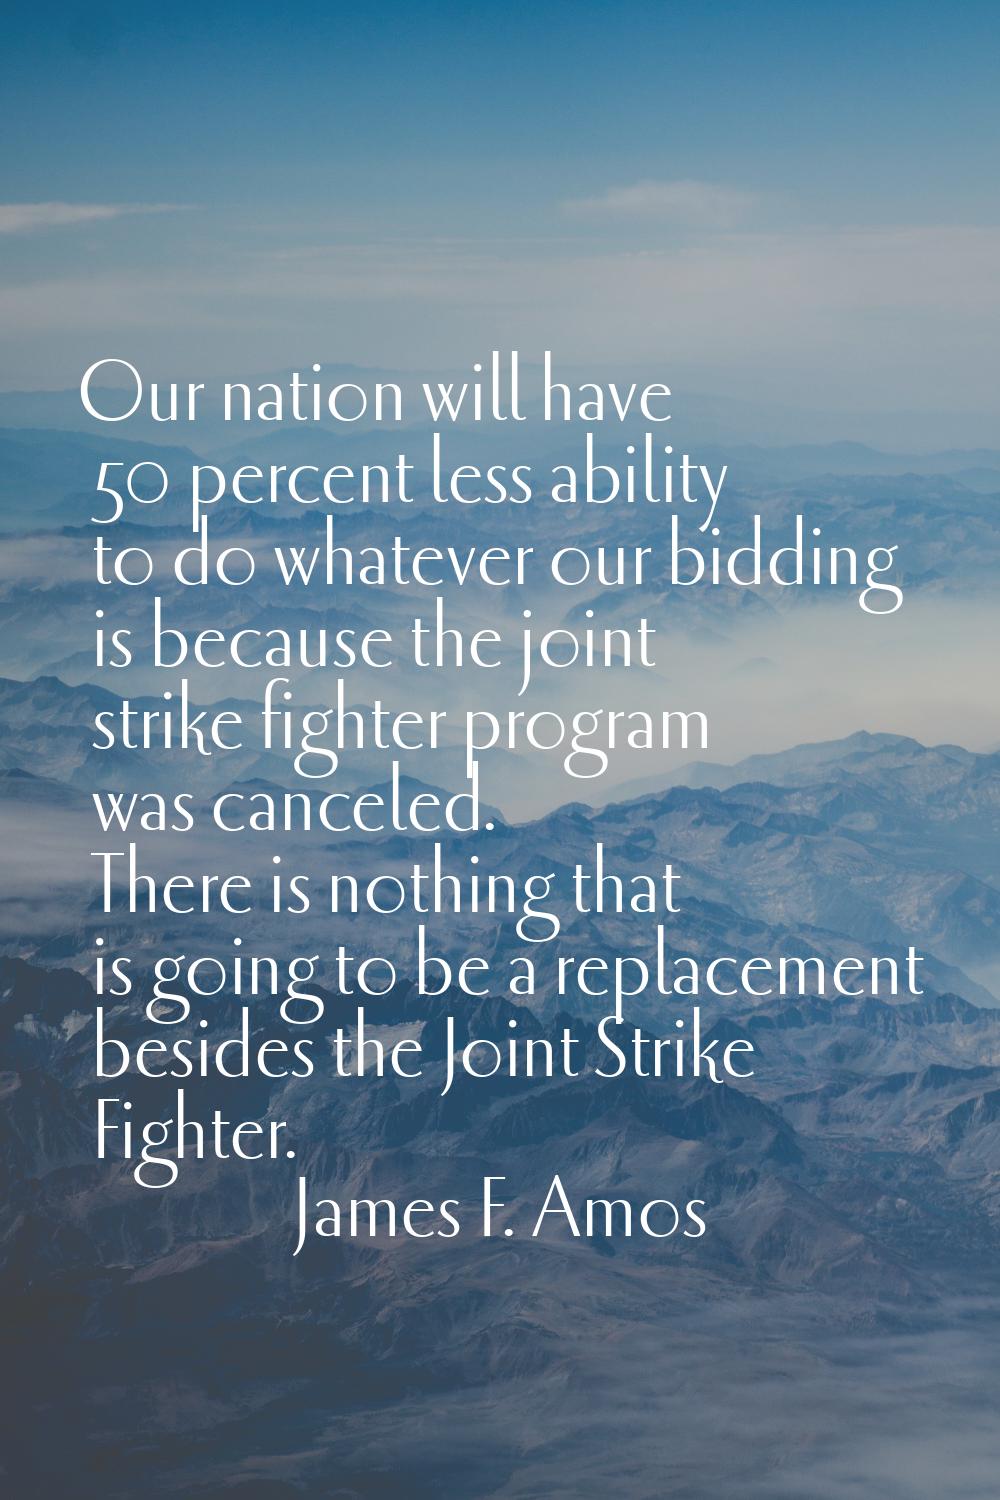 Our nation will have 50 percent less ability to do whatever our bidding is because the joint strike